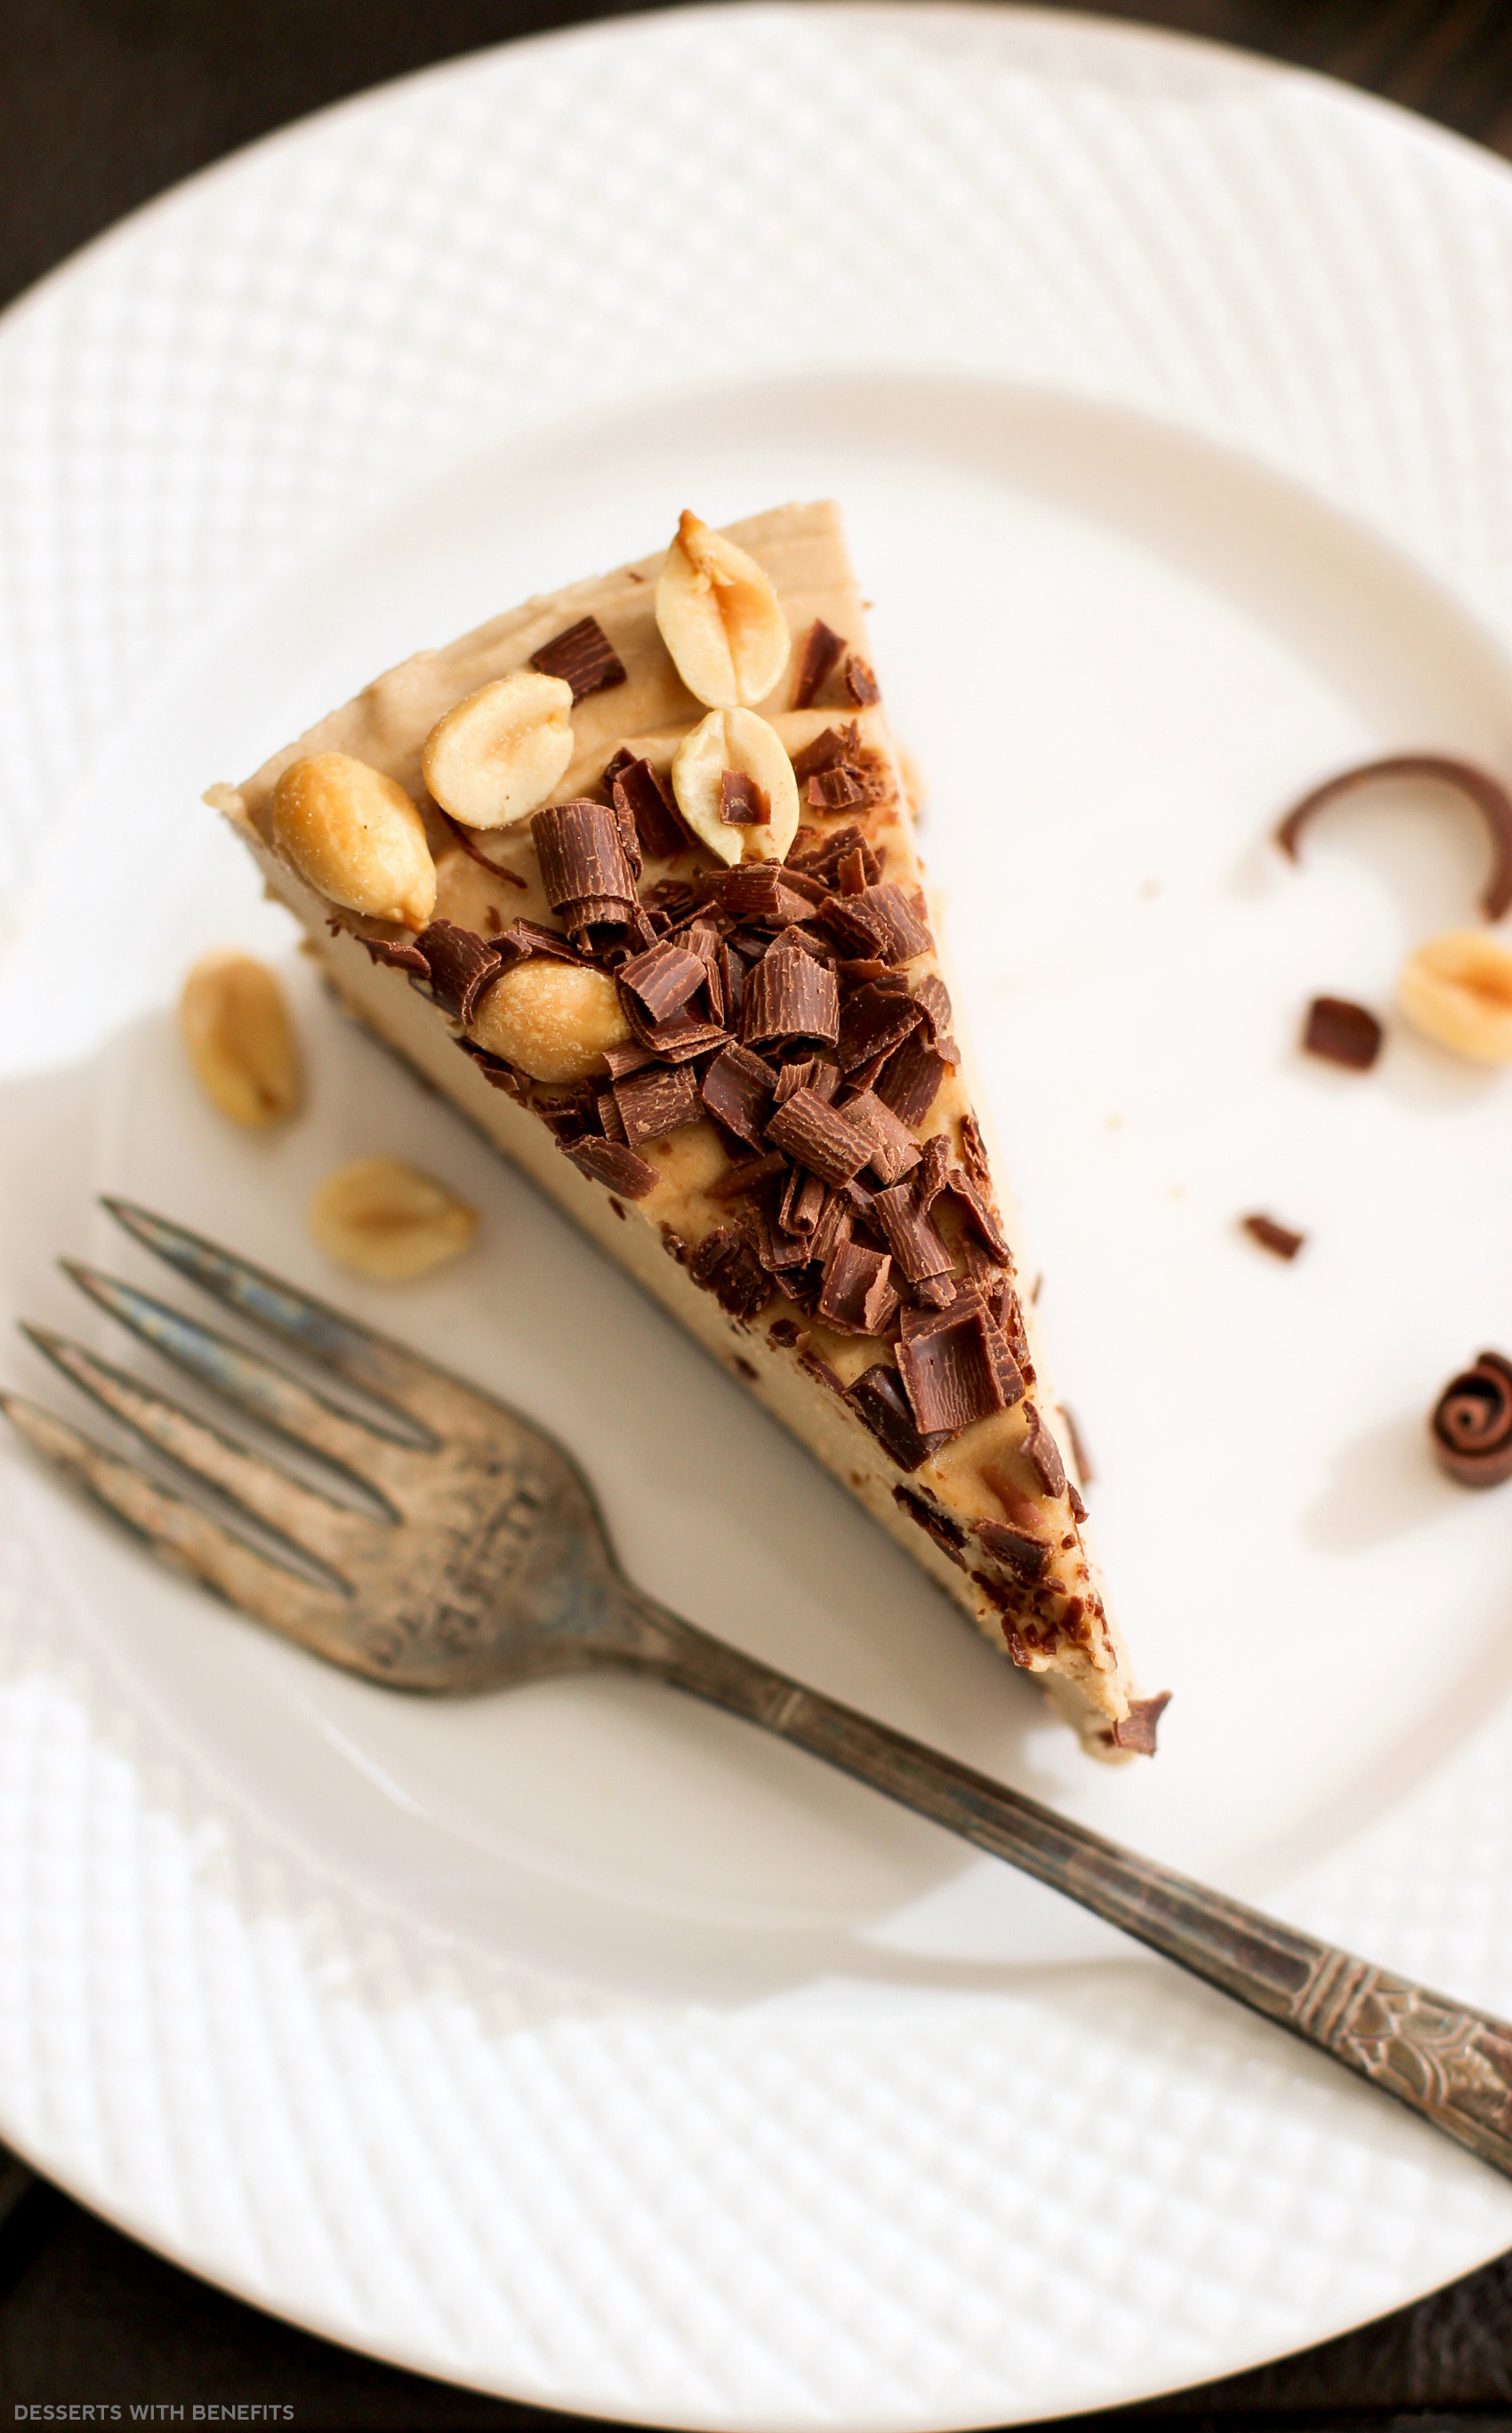 Healthy Chocolate Dessert Recipes
 Healthy Chocolate Peanut Butter Raw Cheesecake